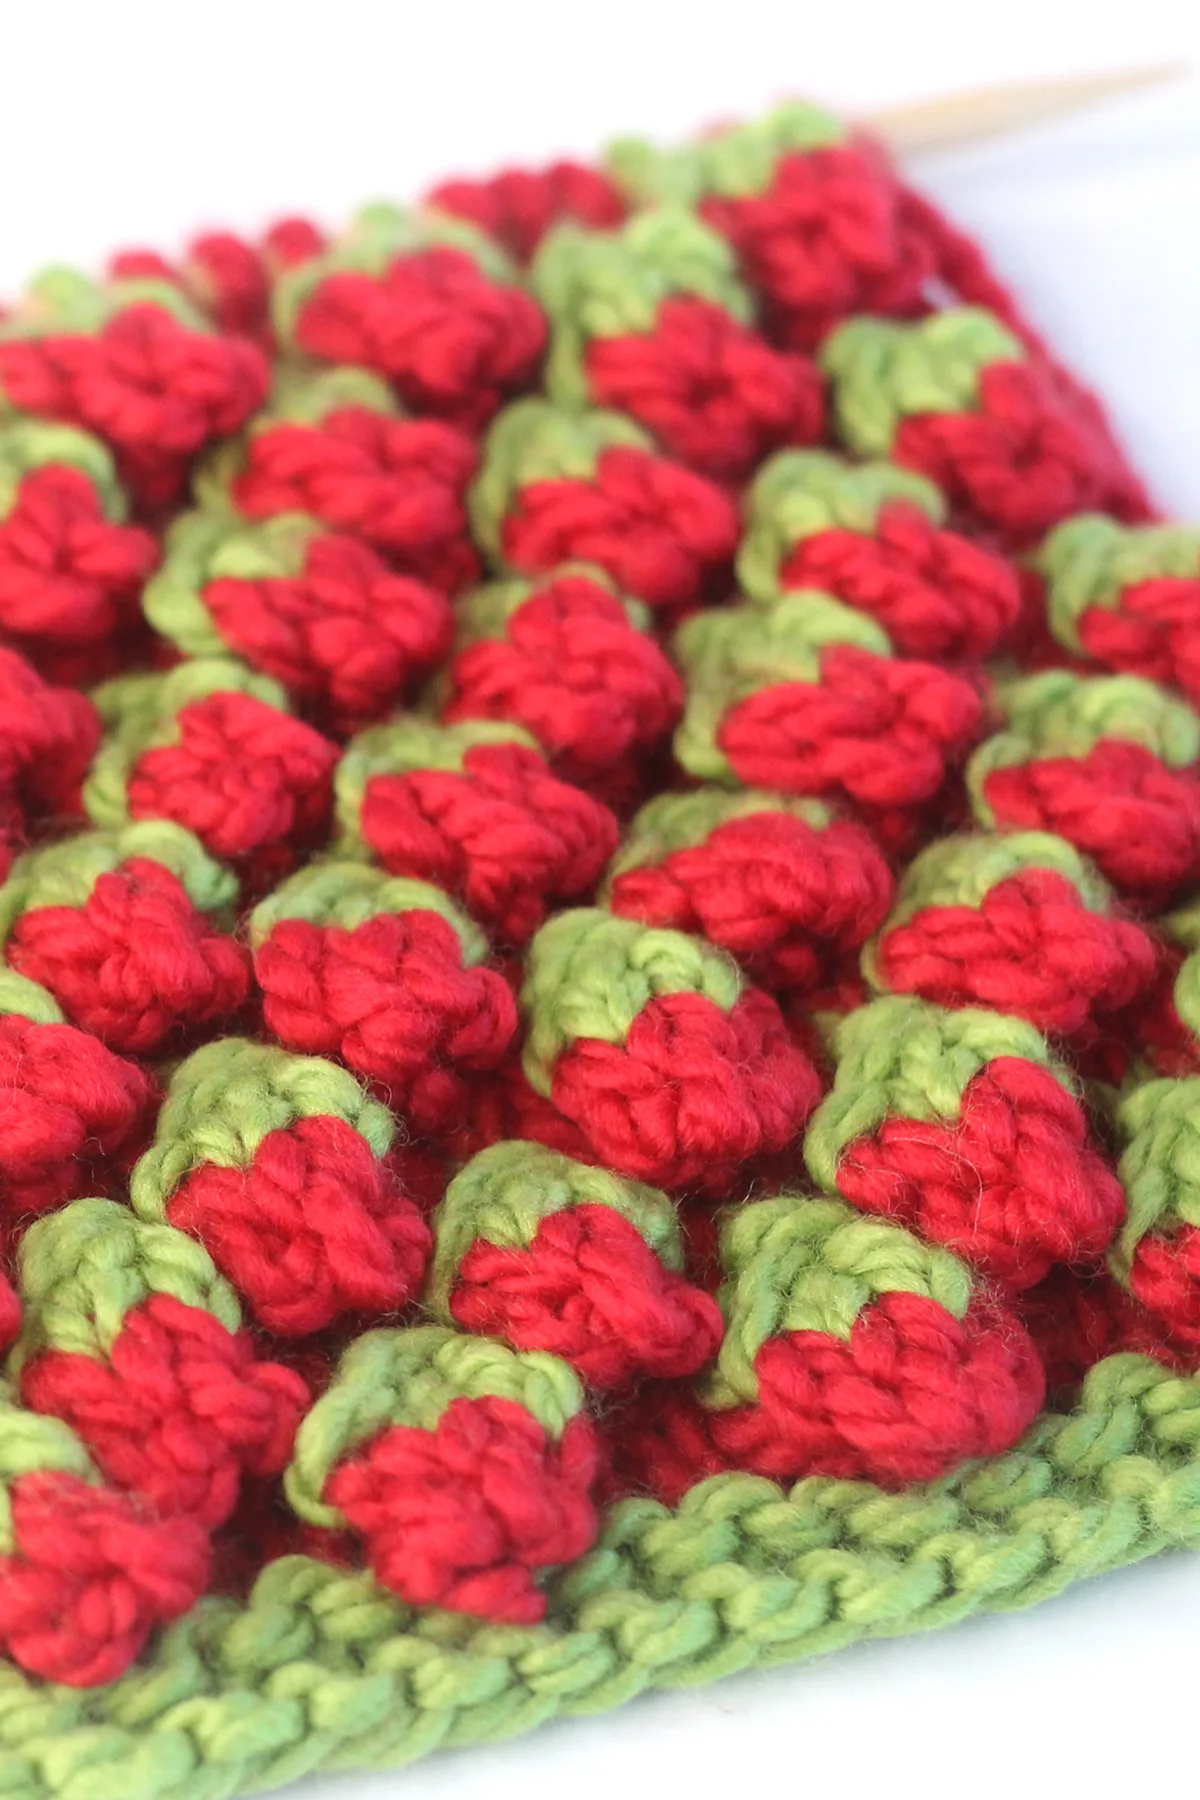 Close-up side view of the strawberry knit stitch bobble pattern in red and green colored yarn on a knitting needle.